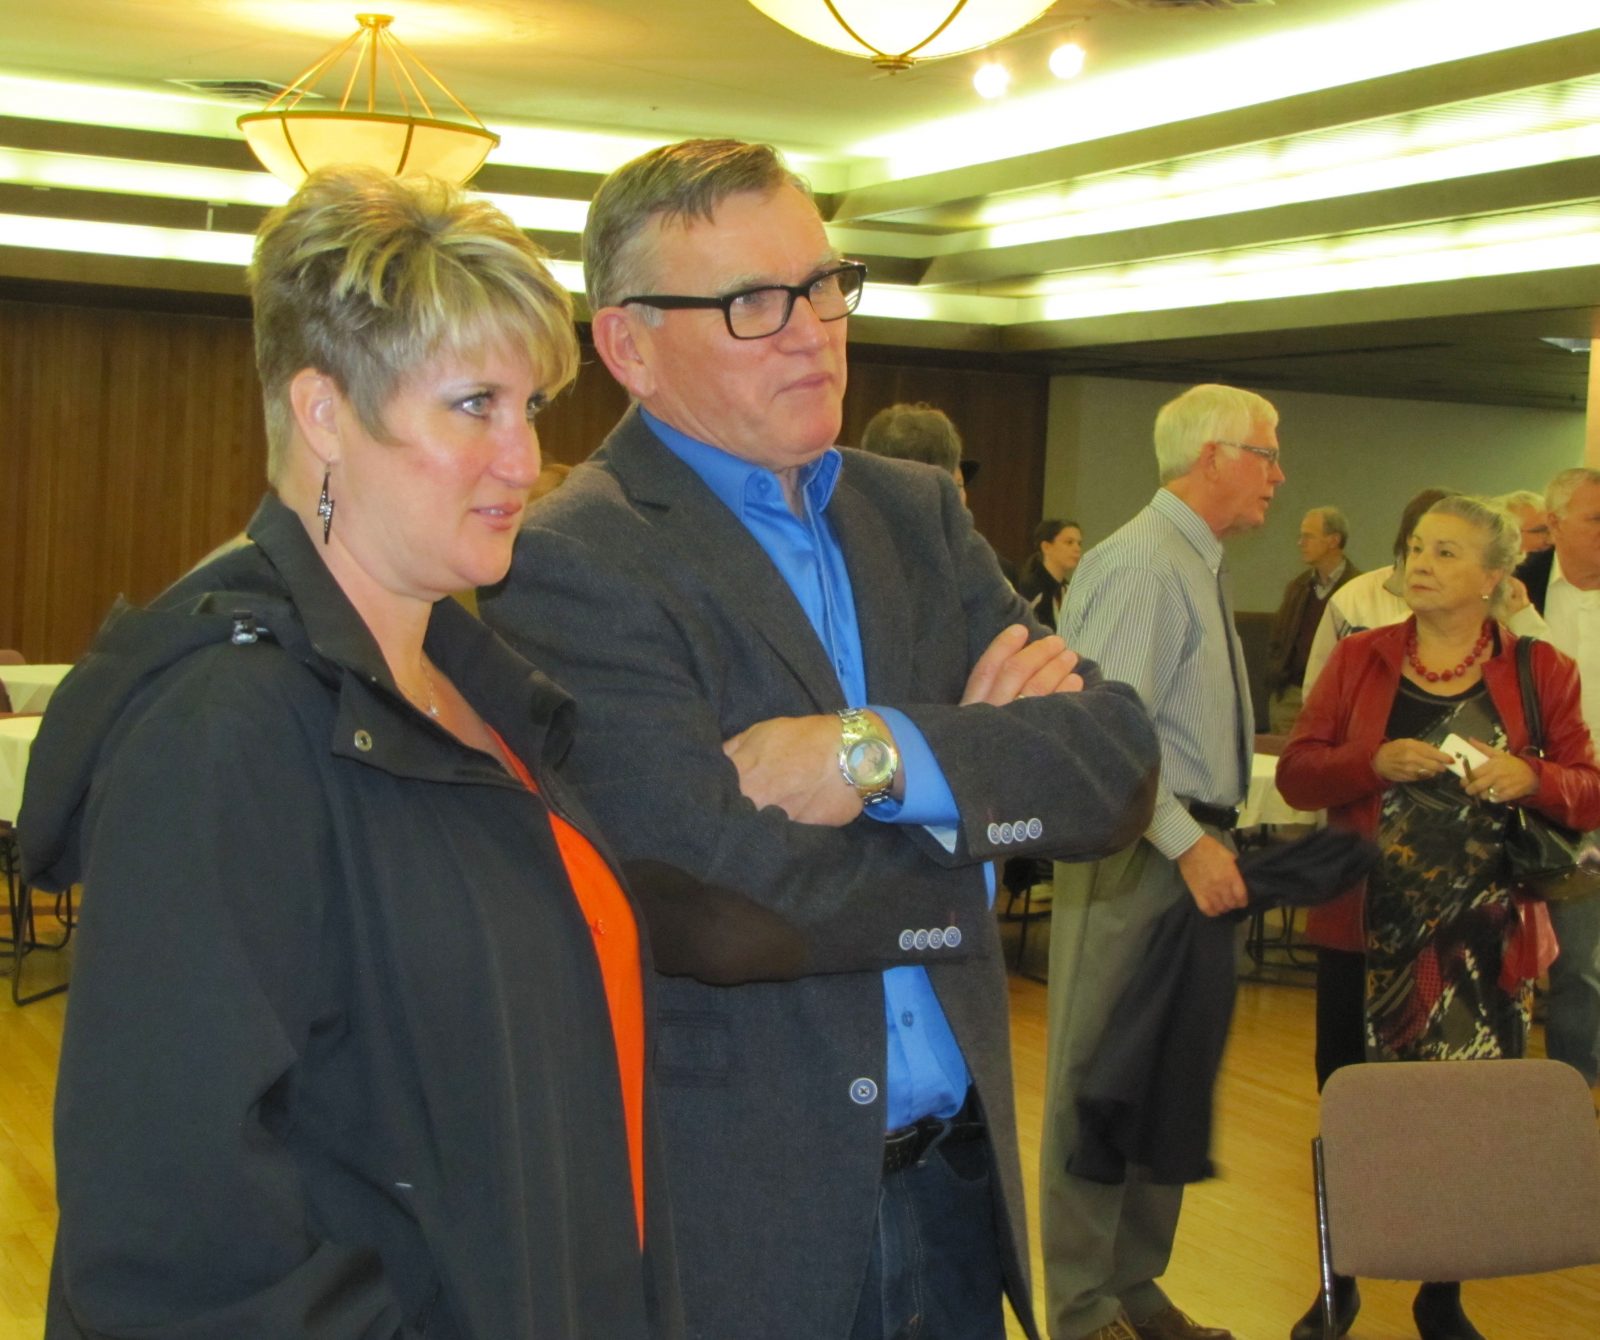 MASSIVE CHANGES: New-look city council elected in Cornwall